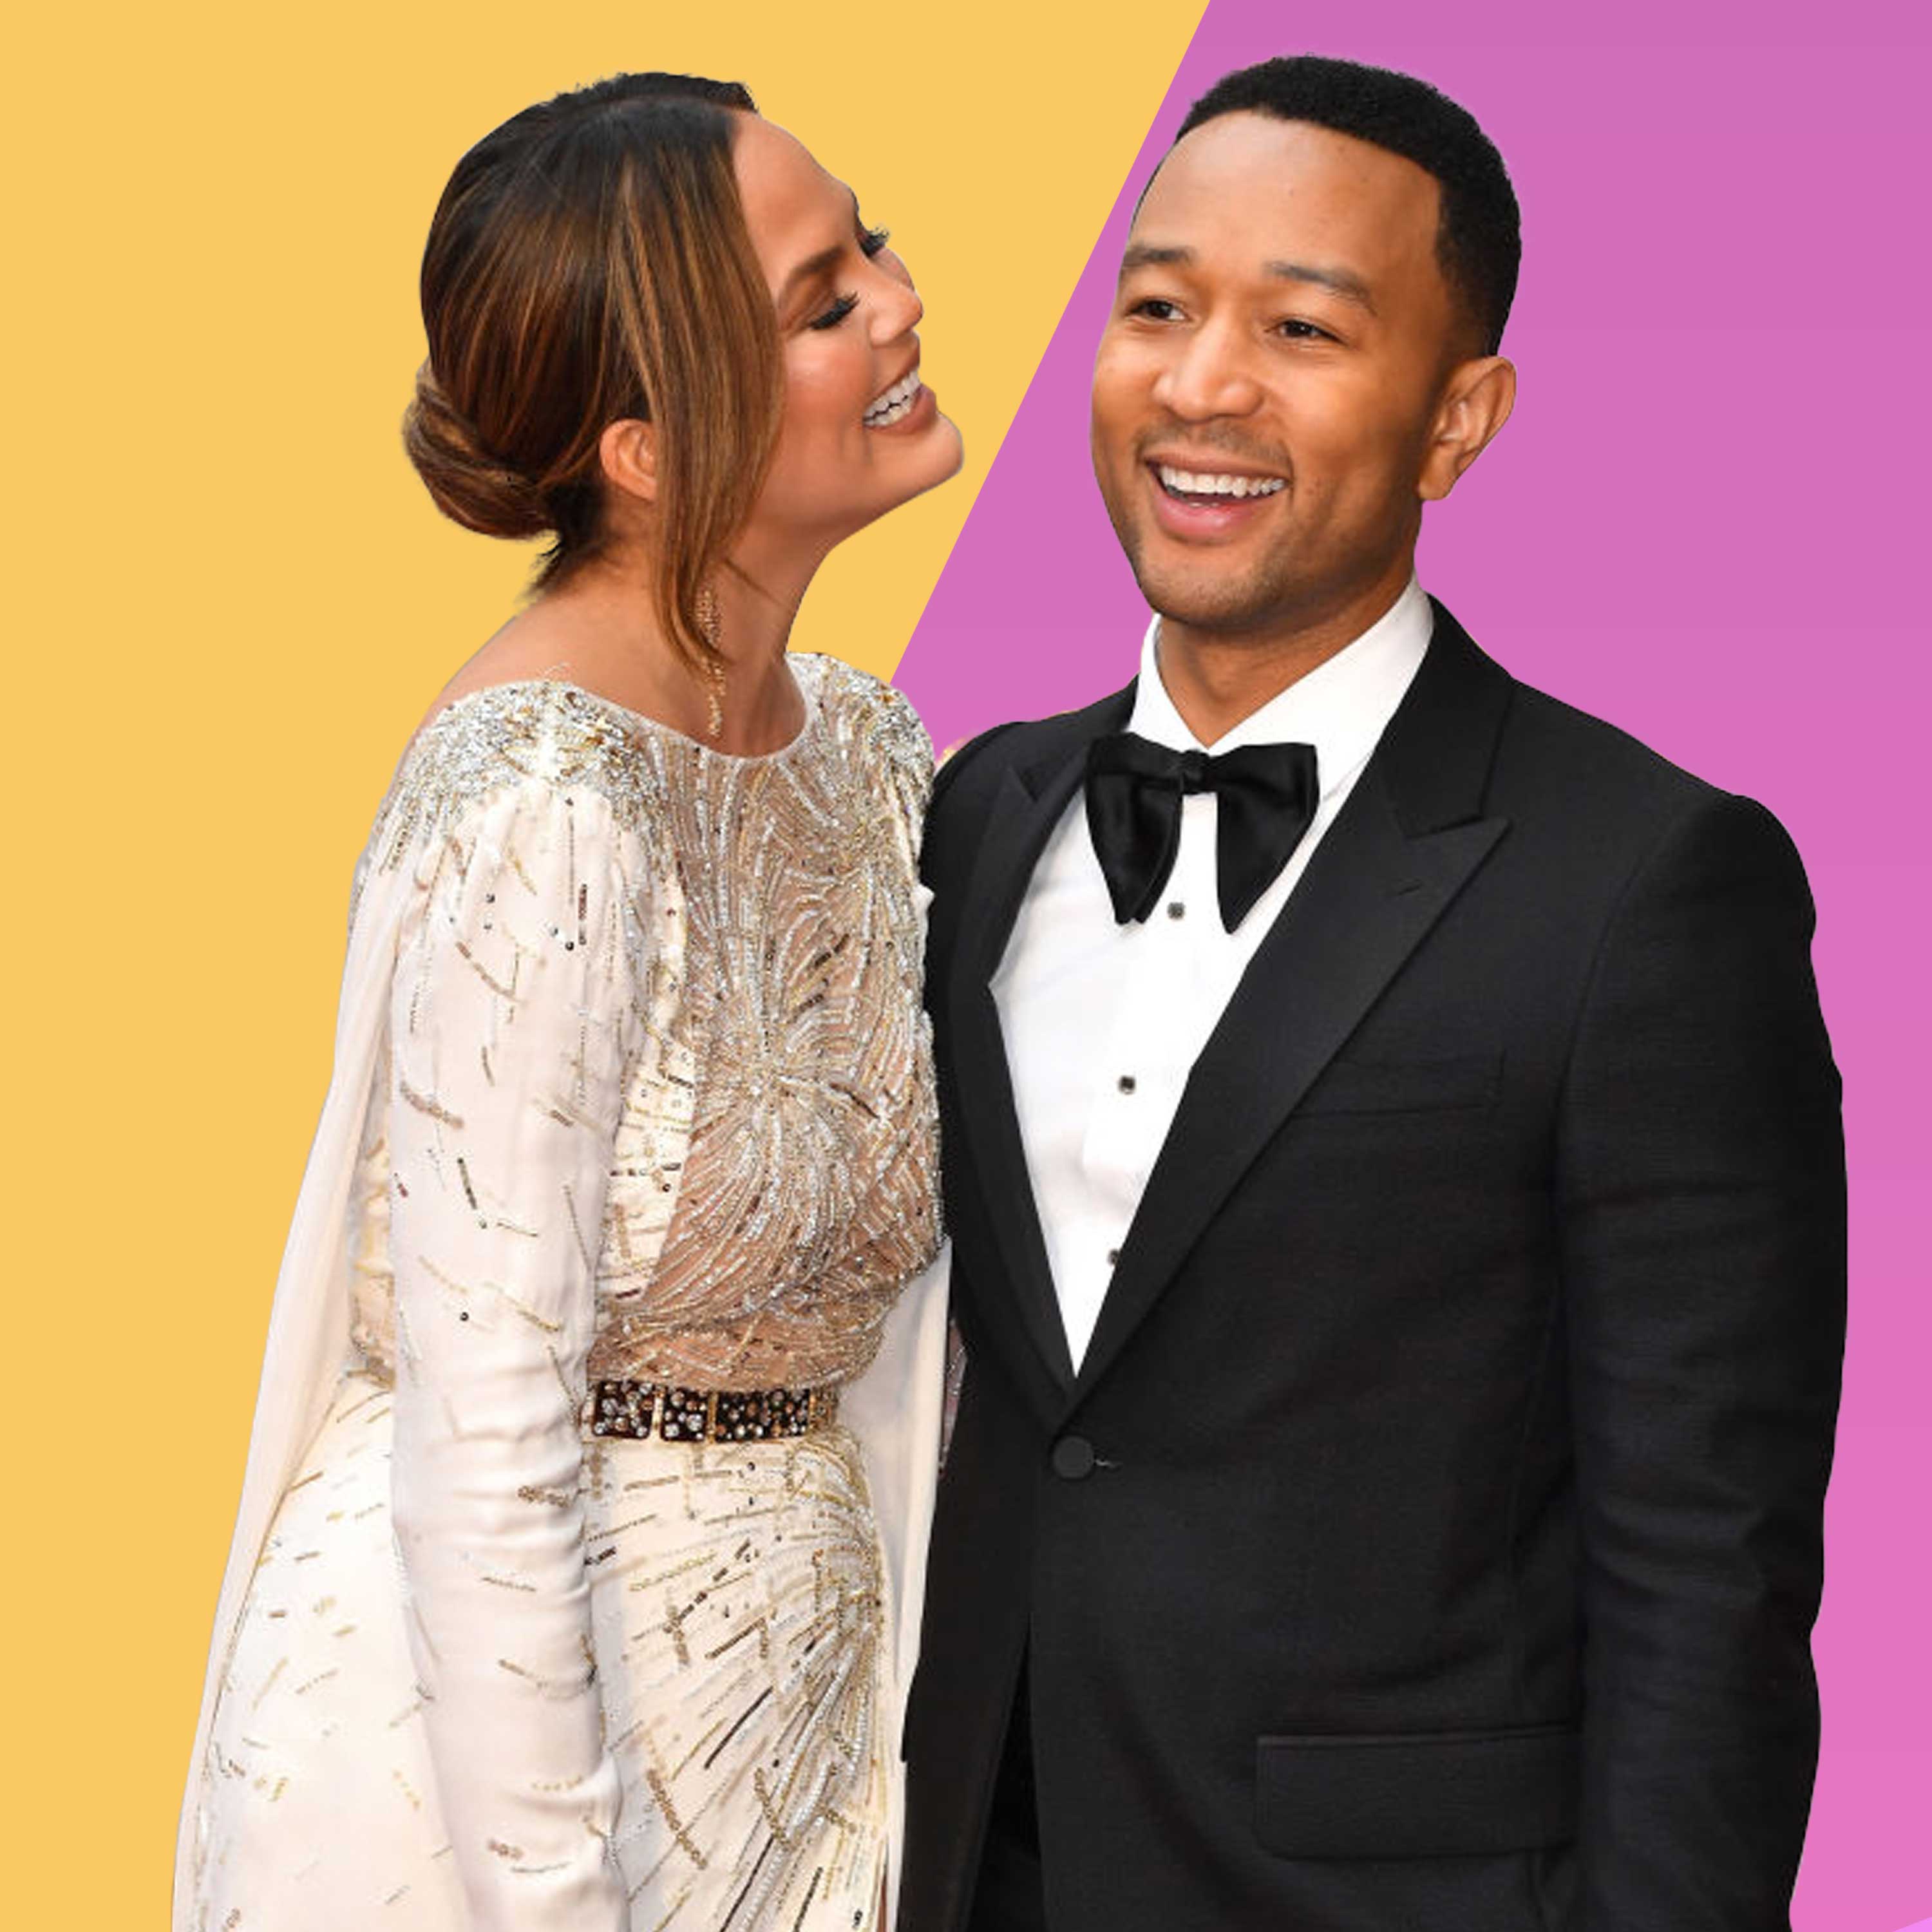 John Legend And Chrissy Teigen Are Actively Planning For Baby No. 2
